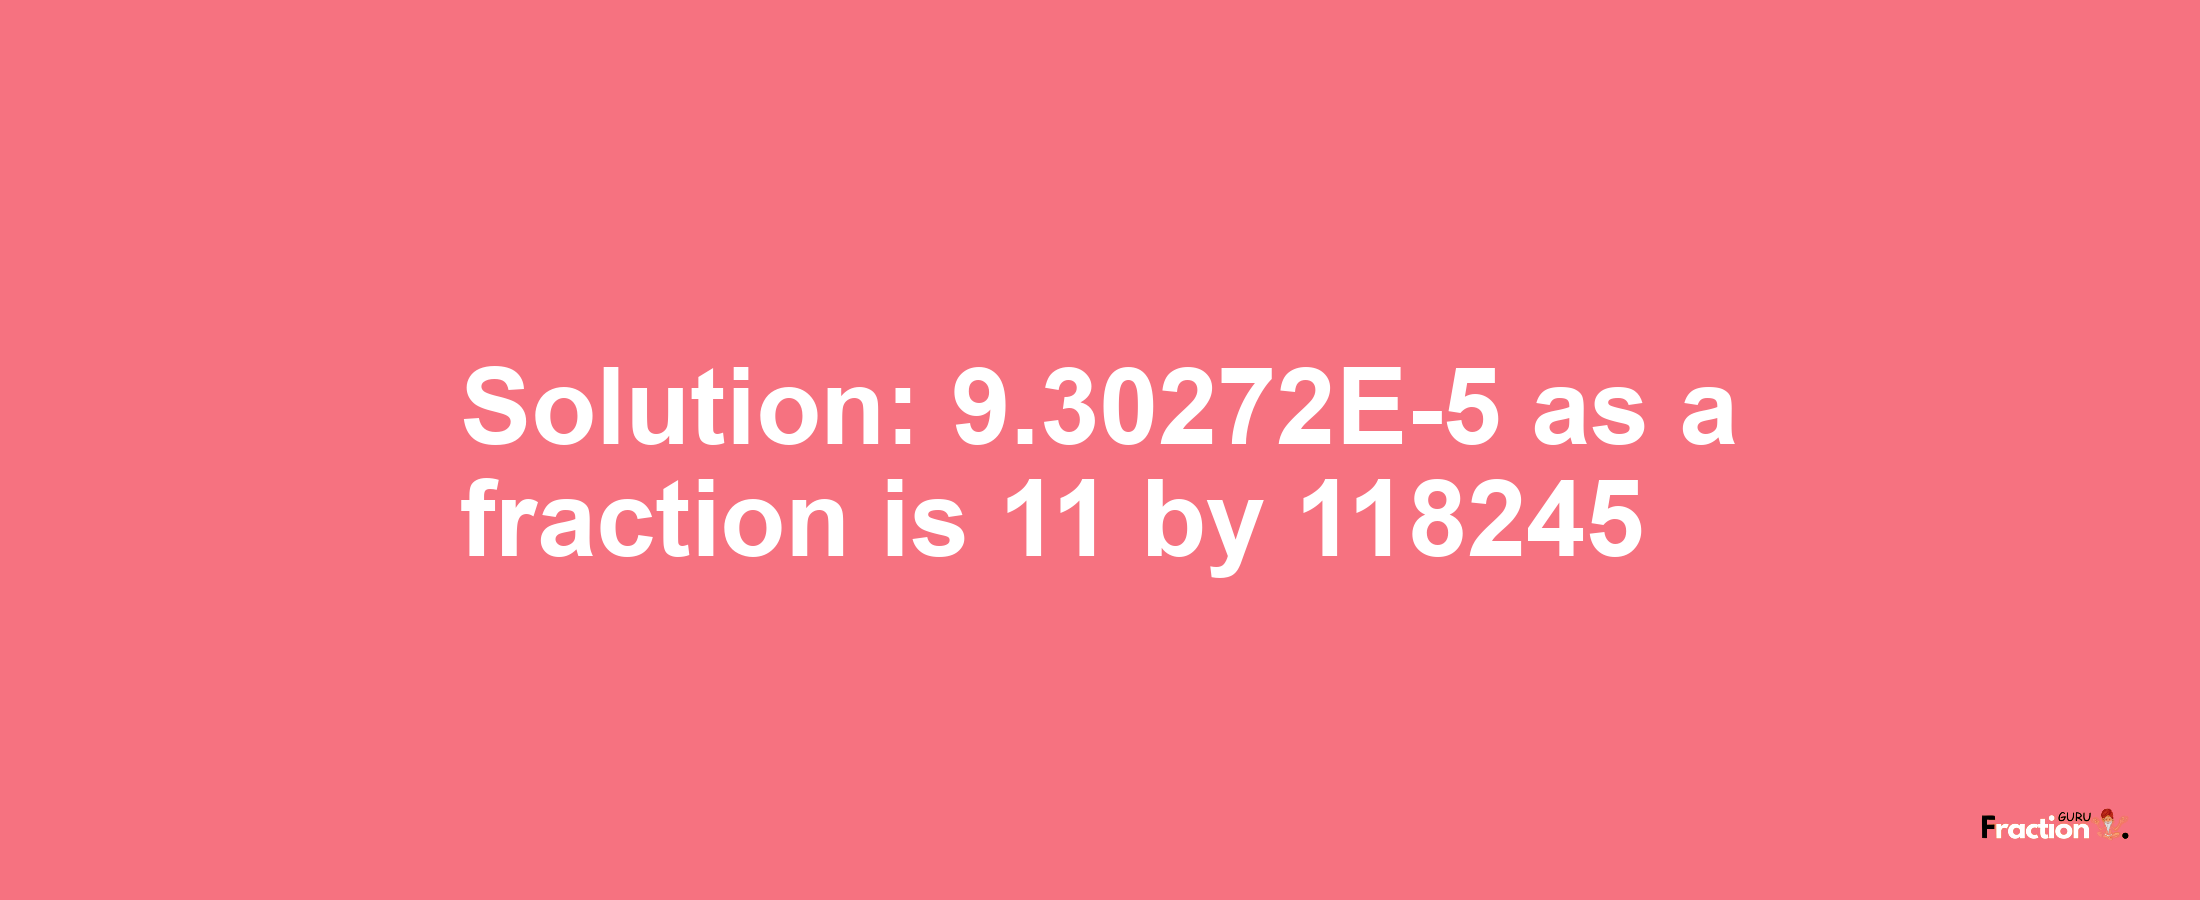 Solution:9.30272E-5 as a fraction is 11/118245